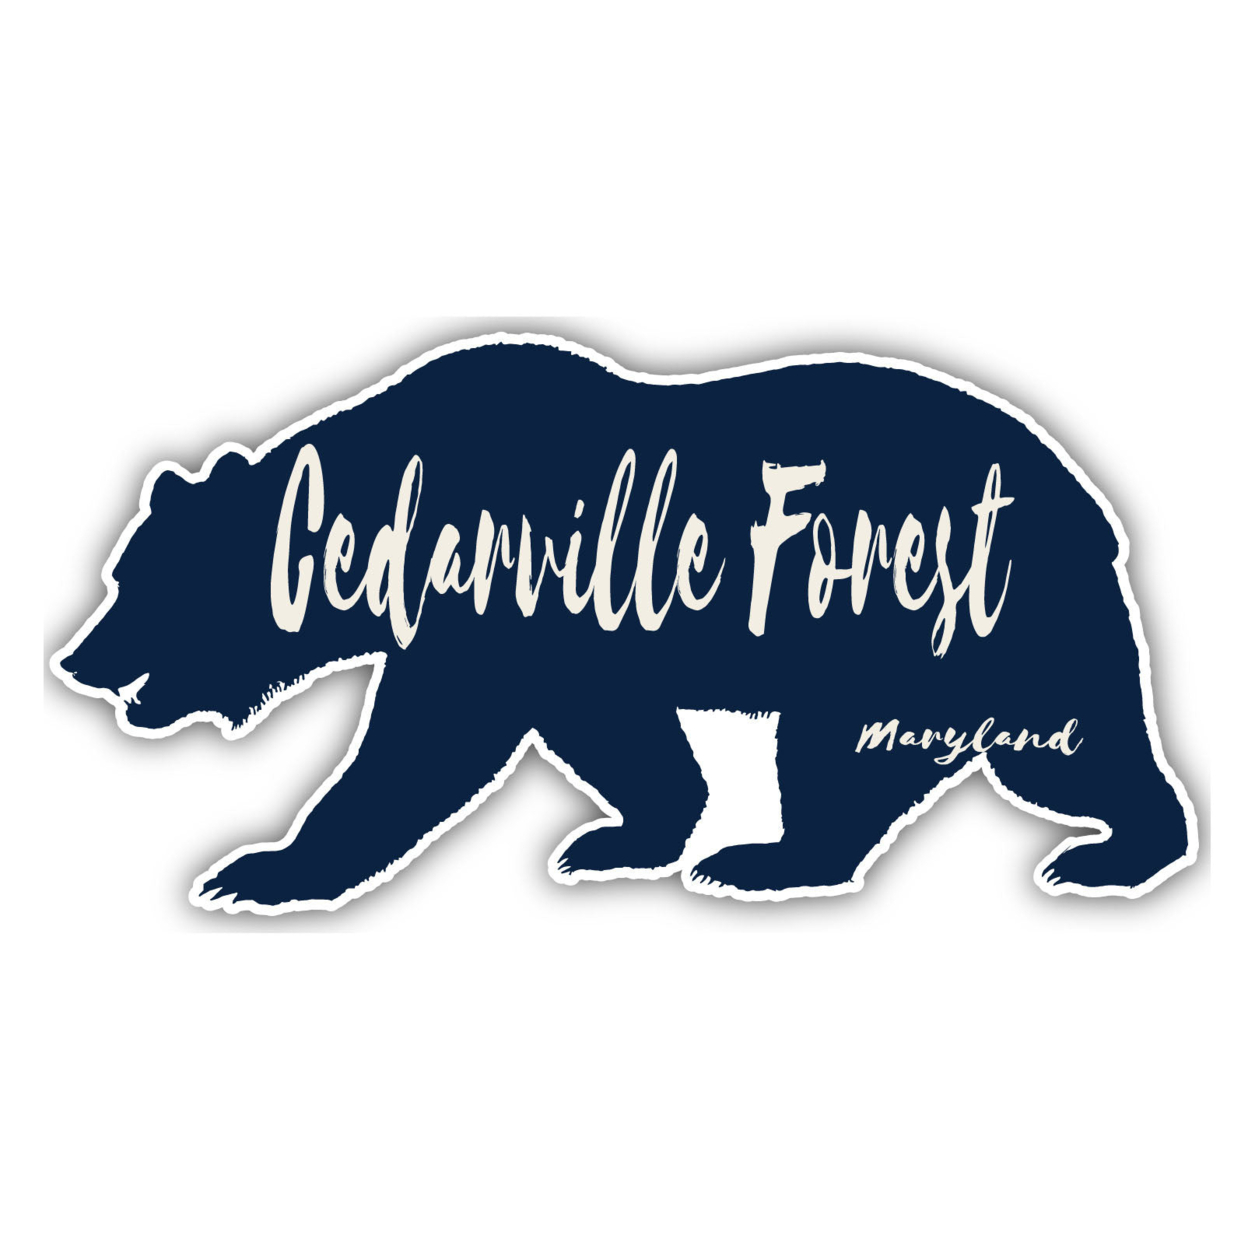 Cedarville Forest Maryland Souvenir Decorative Stickers (Choose Theme And Size) - 4-Pack, 4-Inch, Bear